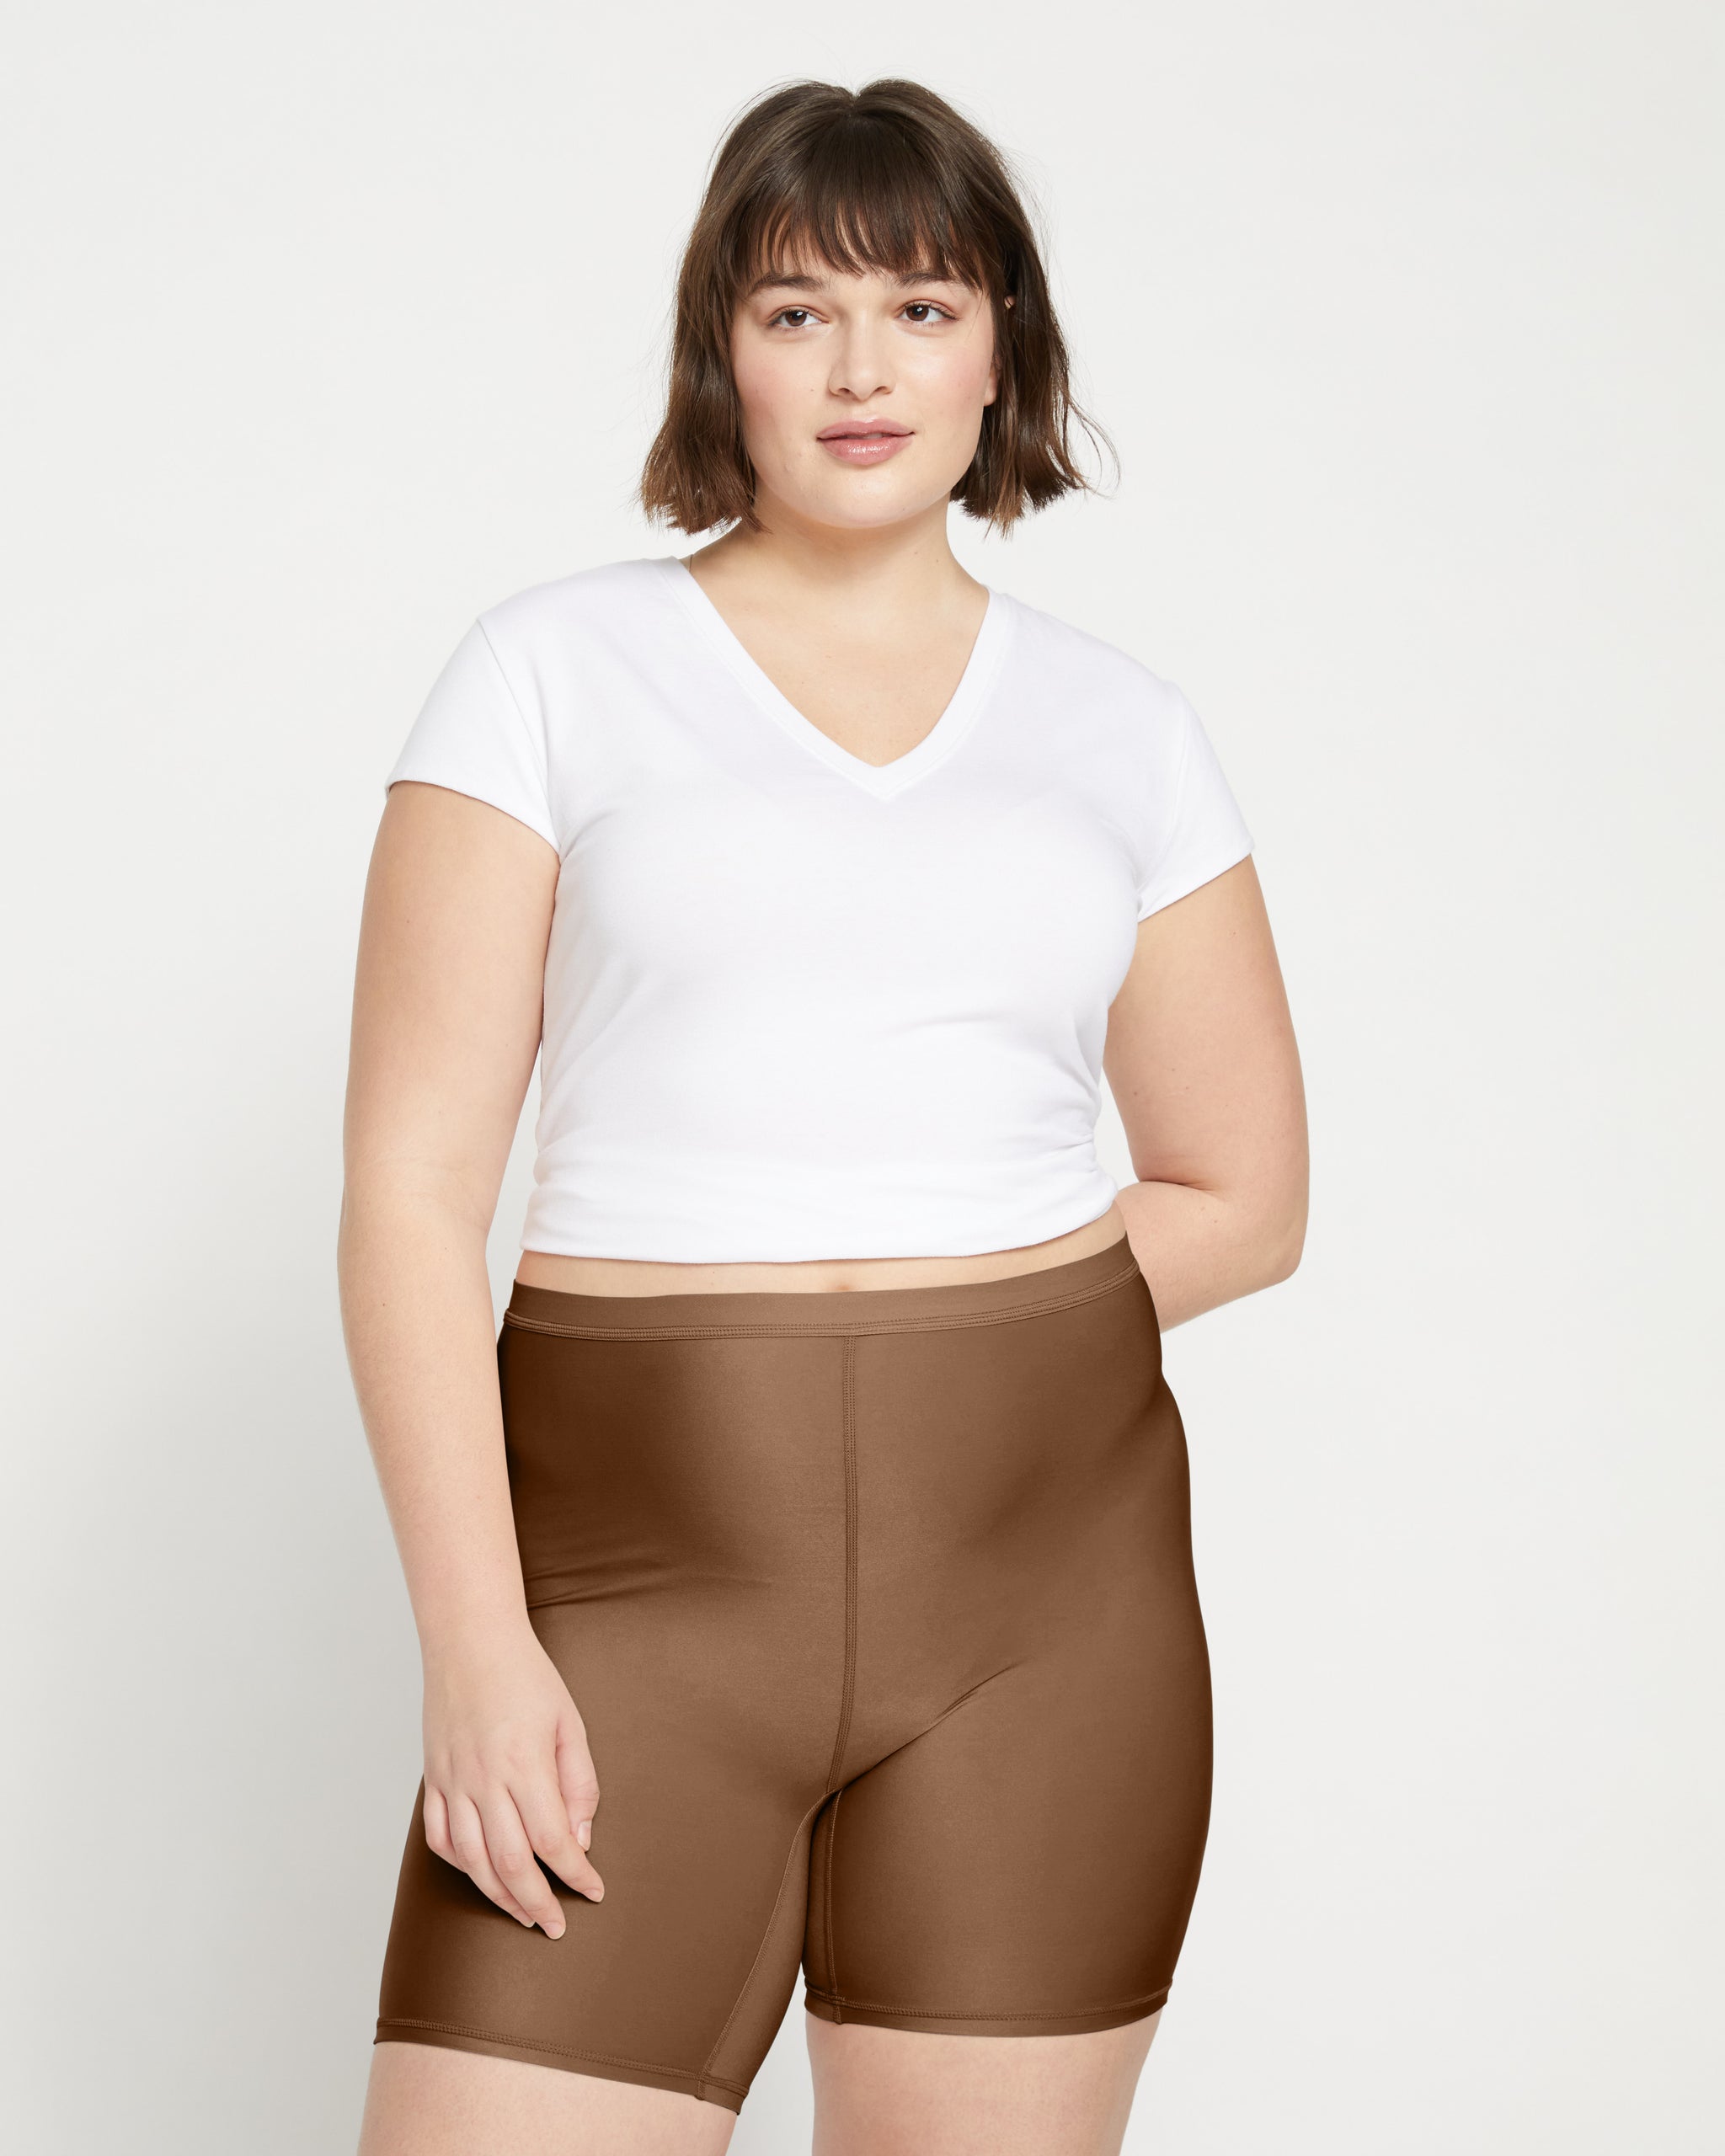 Barely-There Slip Shorts - Cocoa | Universal Standard